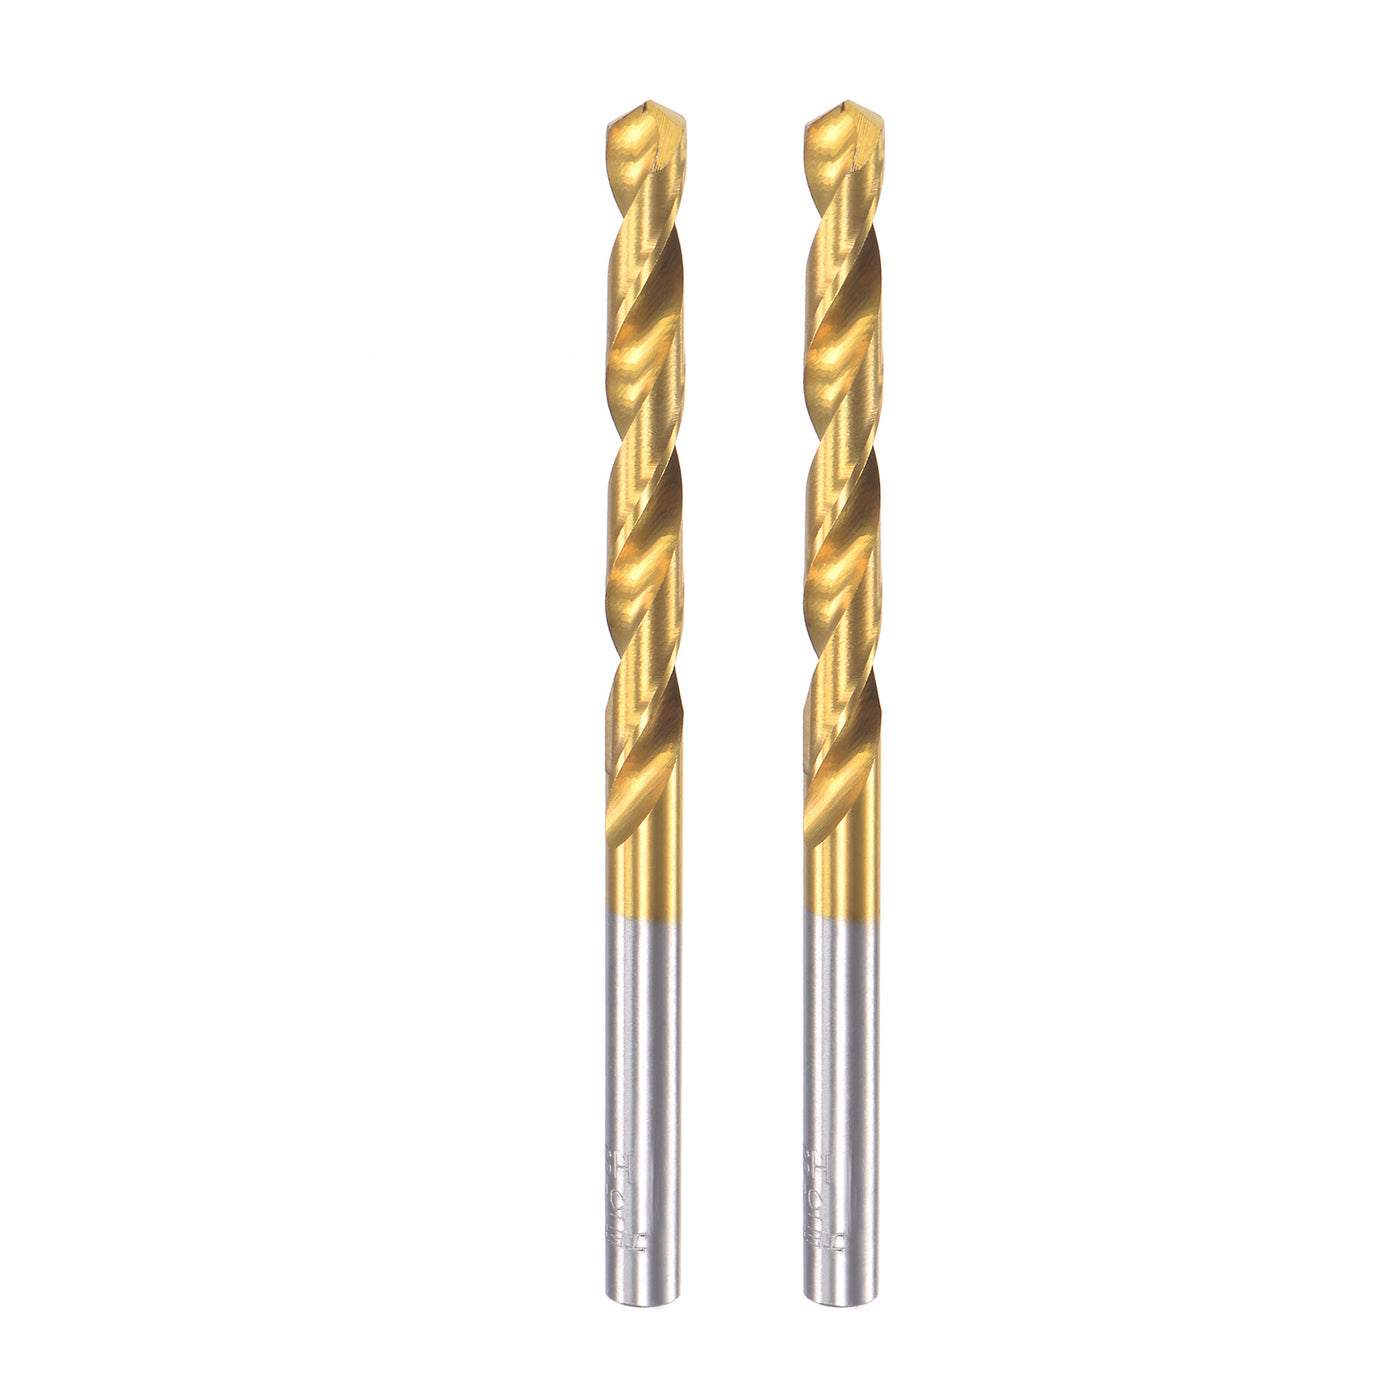 uxcell Uxcell High Speed Steel Twist Drill Bit 5.8mm Fully Ground Titanium Coated 2 Pcs